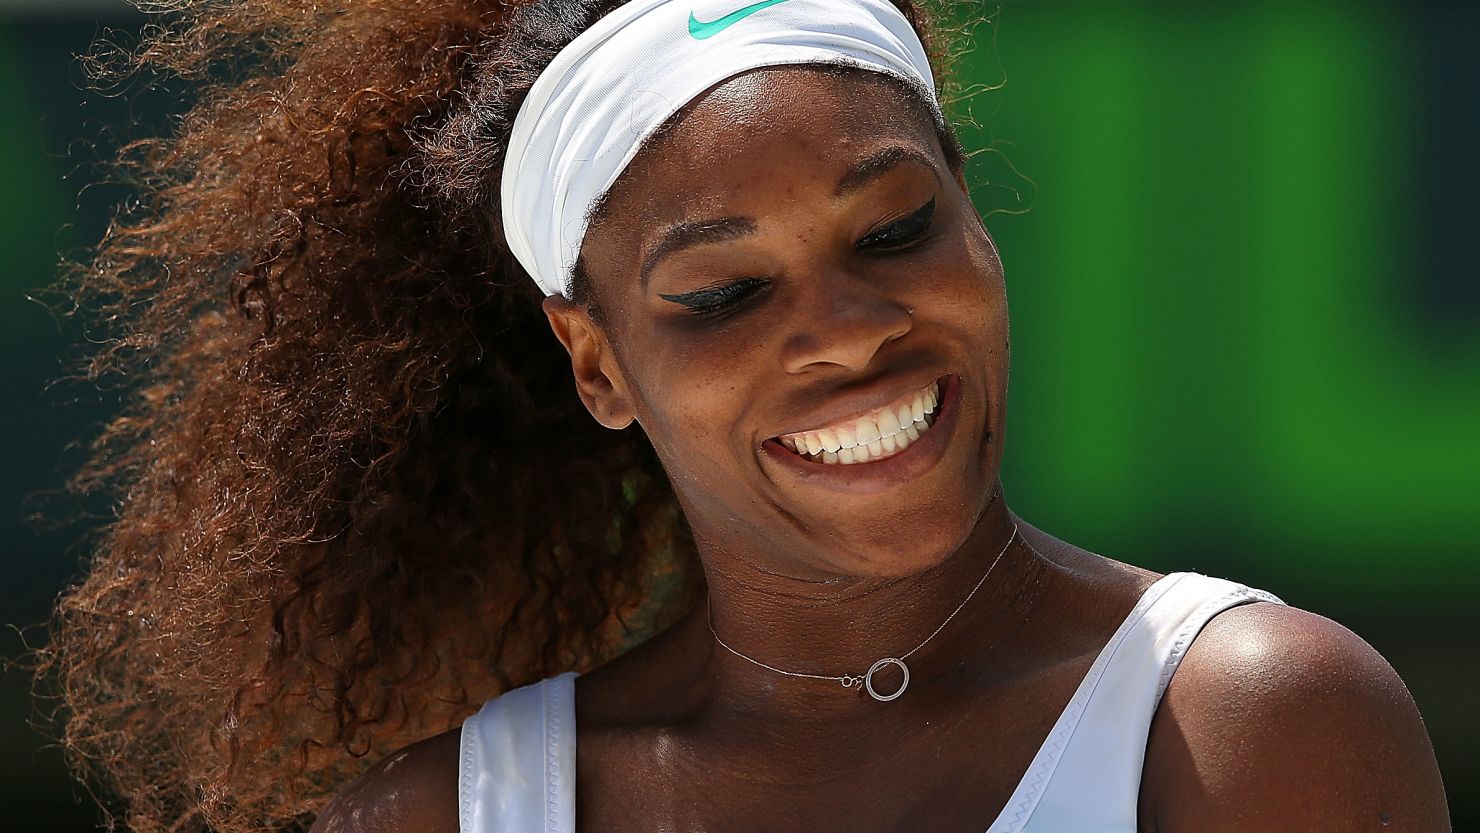 Serena Williams followed up her victory in Miami last month by adding to her 2008 and 2012 Charleston titles.